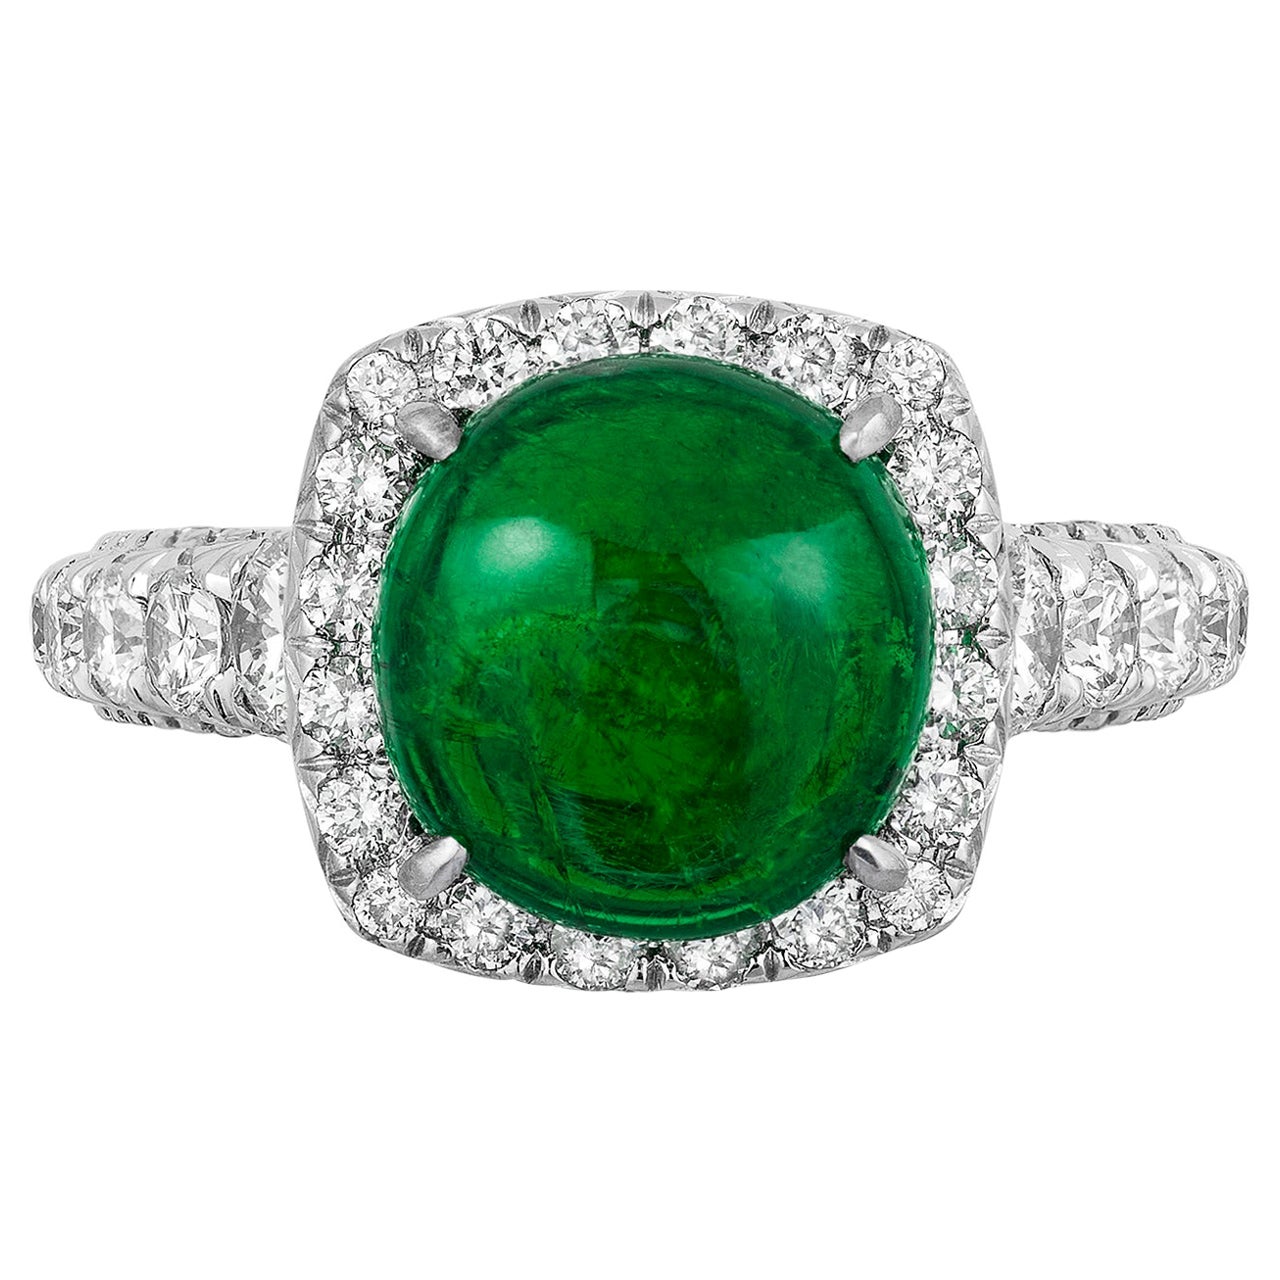 Andreoli 3.50 Carat Emerald Diamond 18 Karat White Gold Ring CDC Certified For Sale